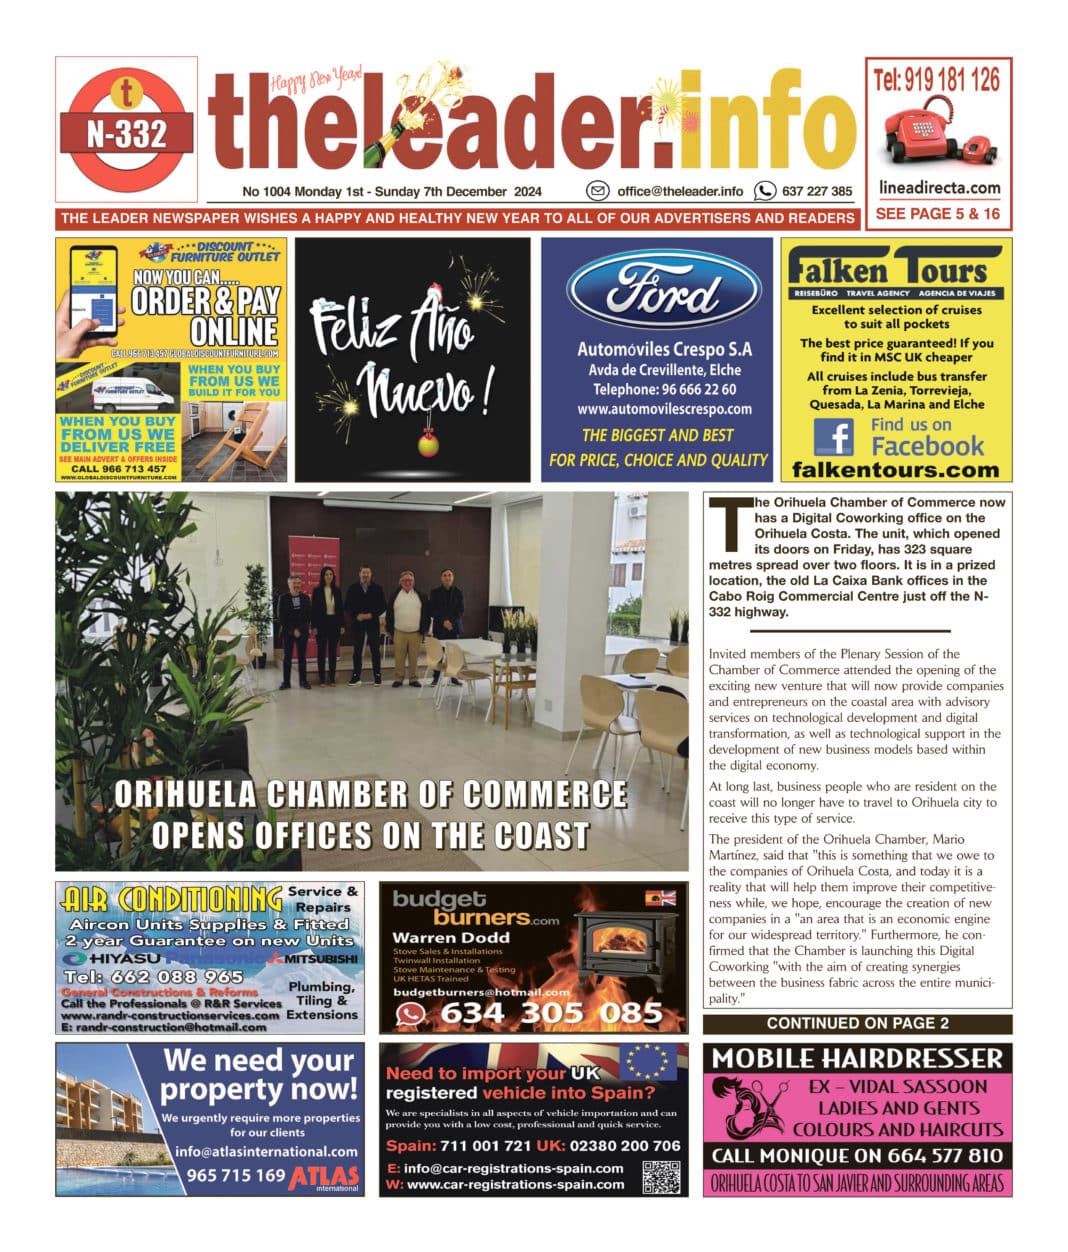 The Leader Newspaper 1 January 2024 – Edition 1004